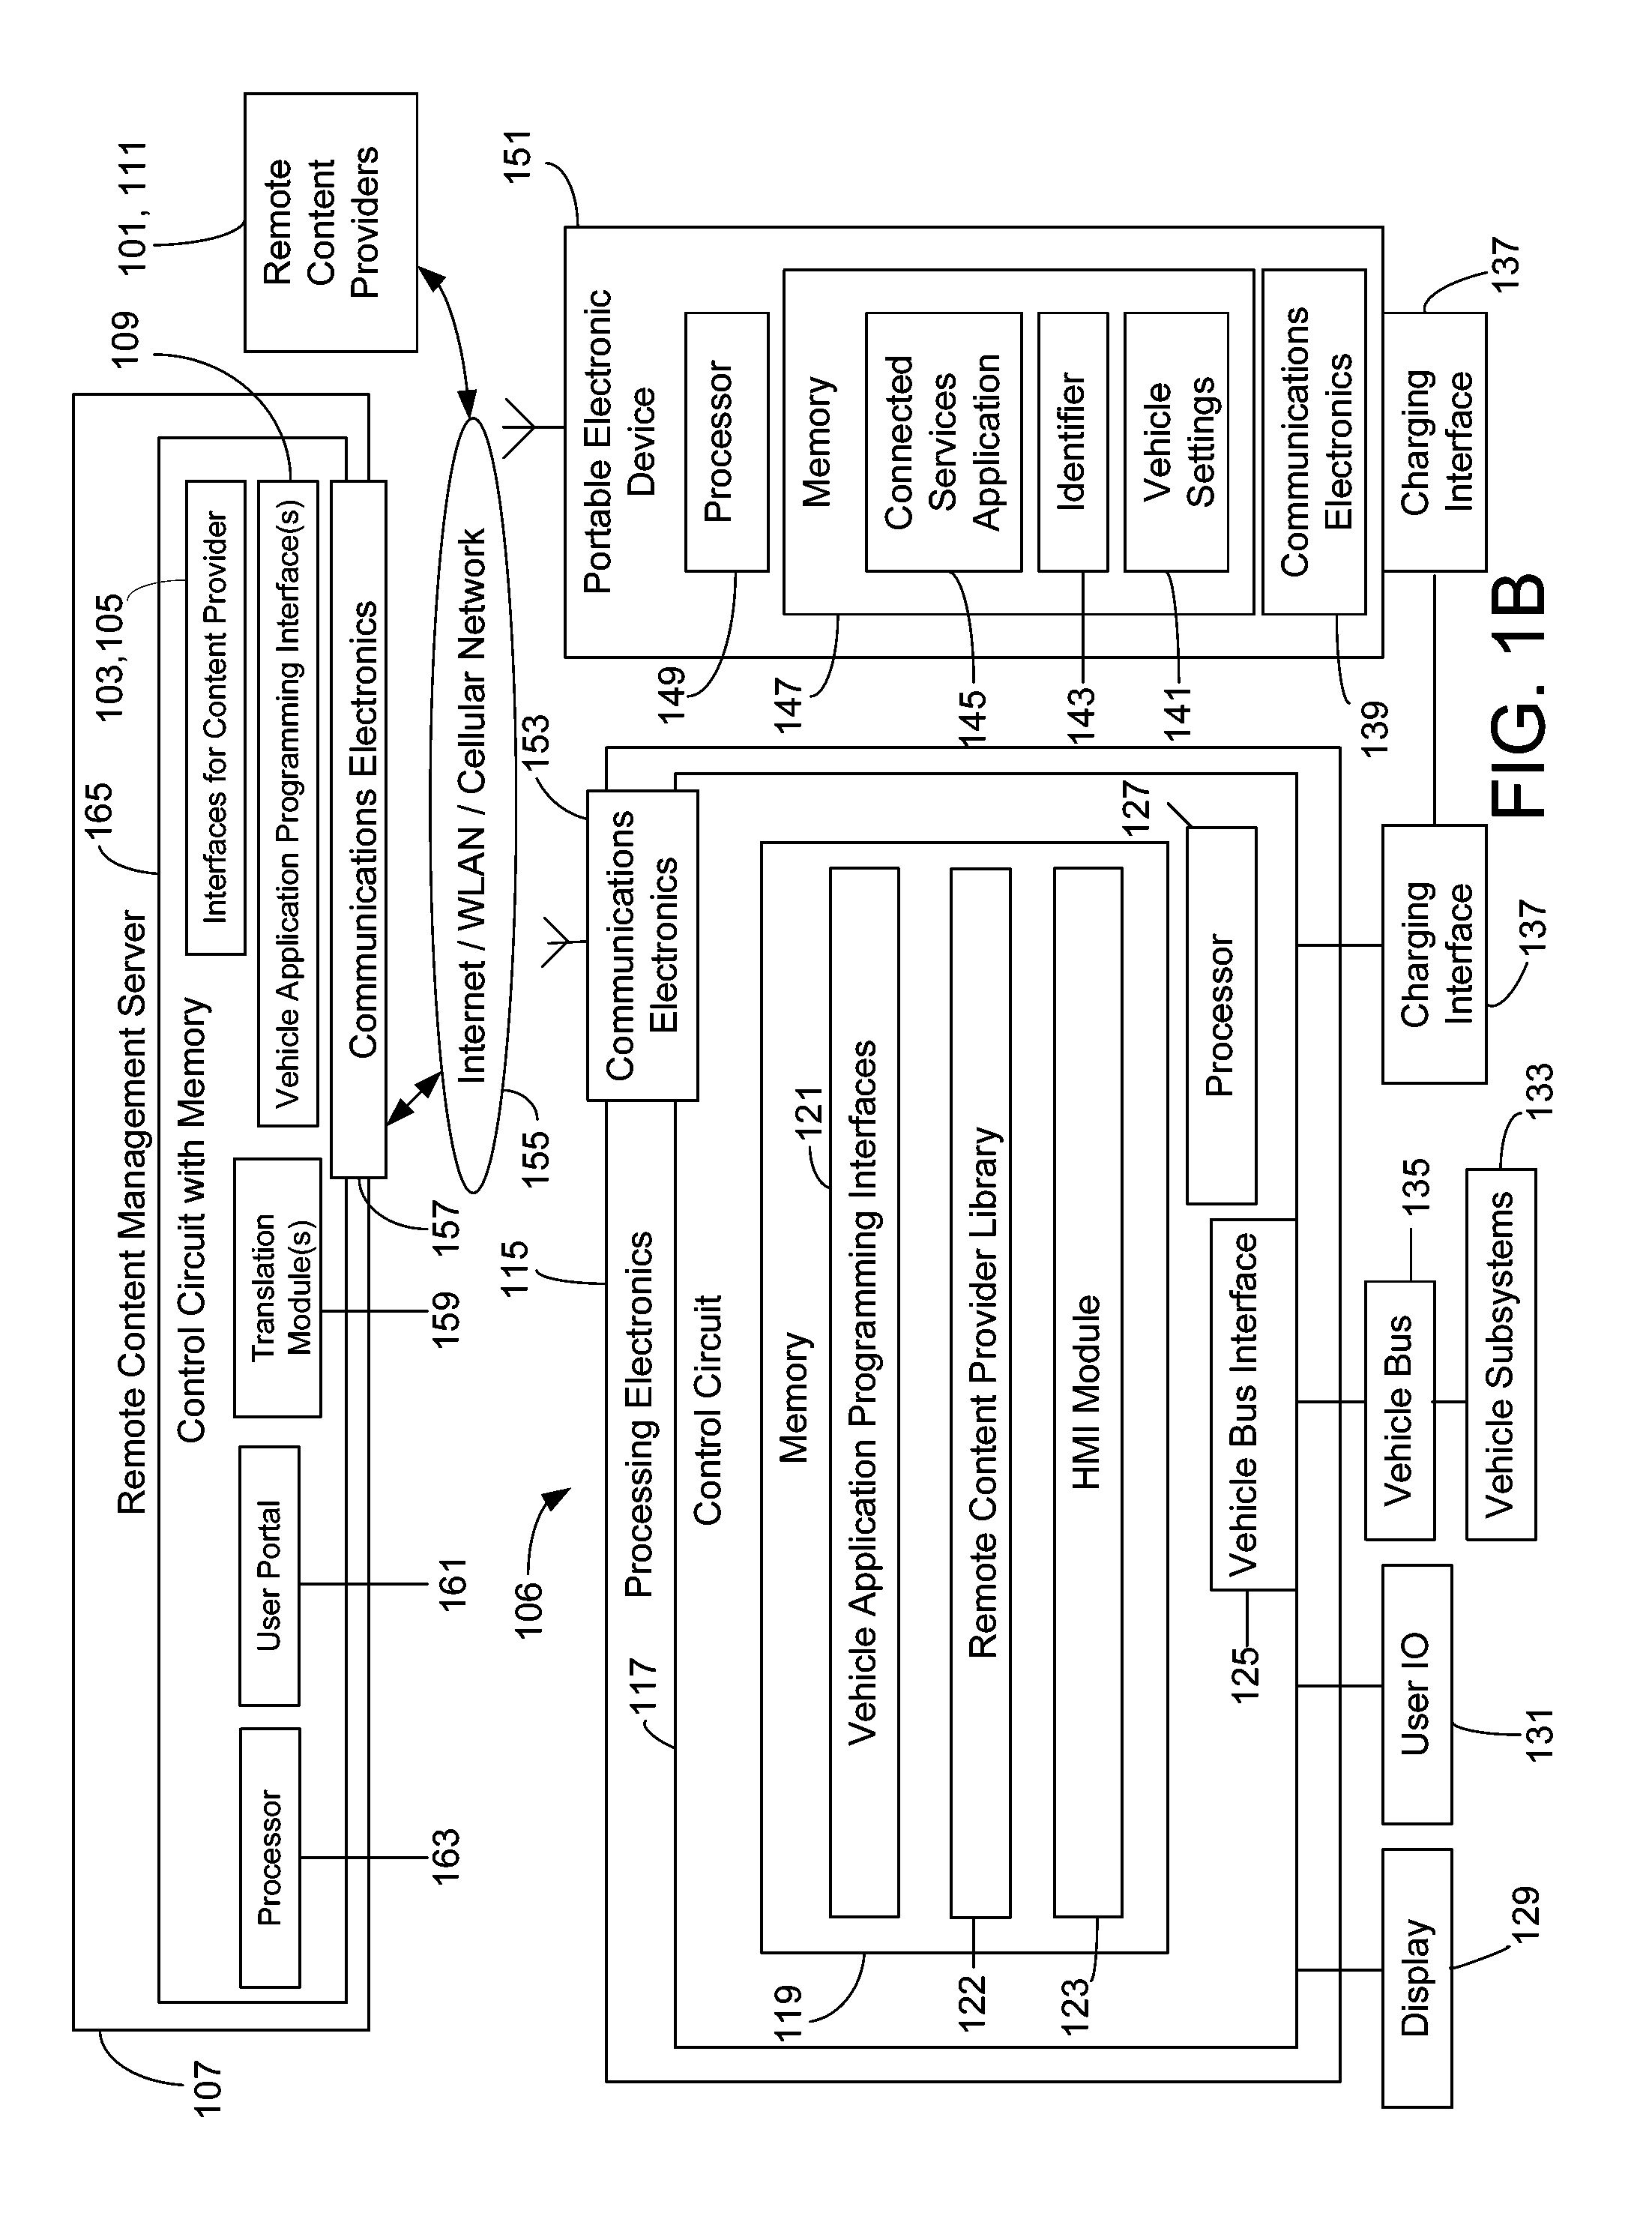 Systems and methods for providing network-based content to an in-vehicle telematics system